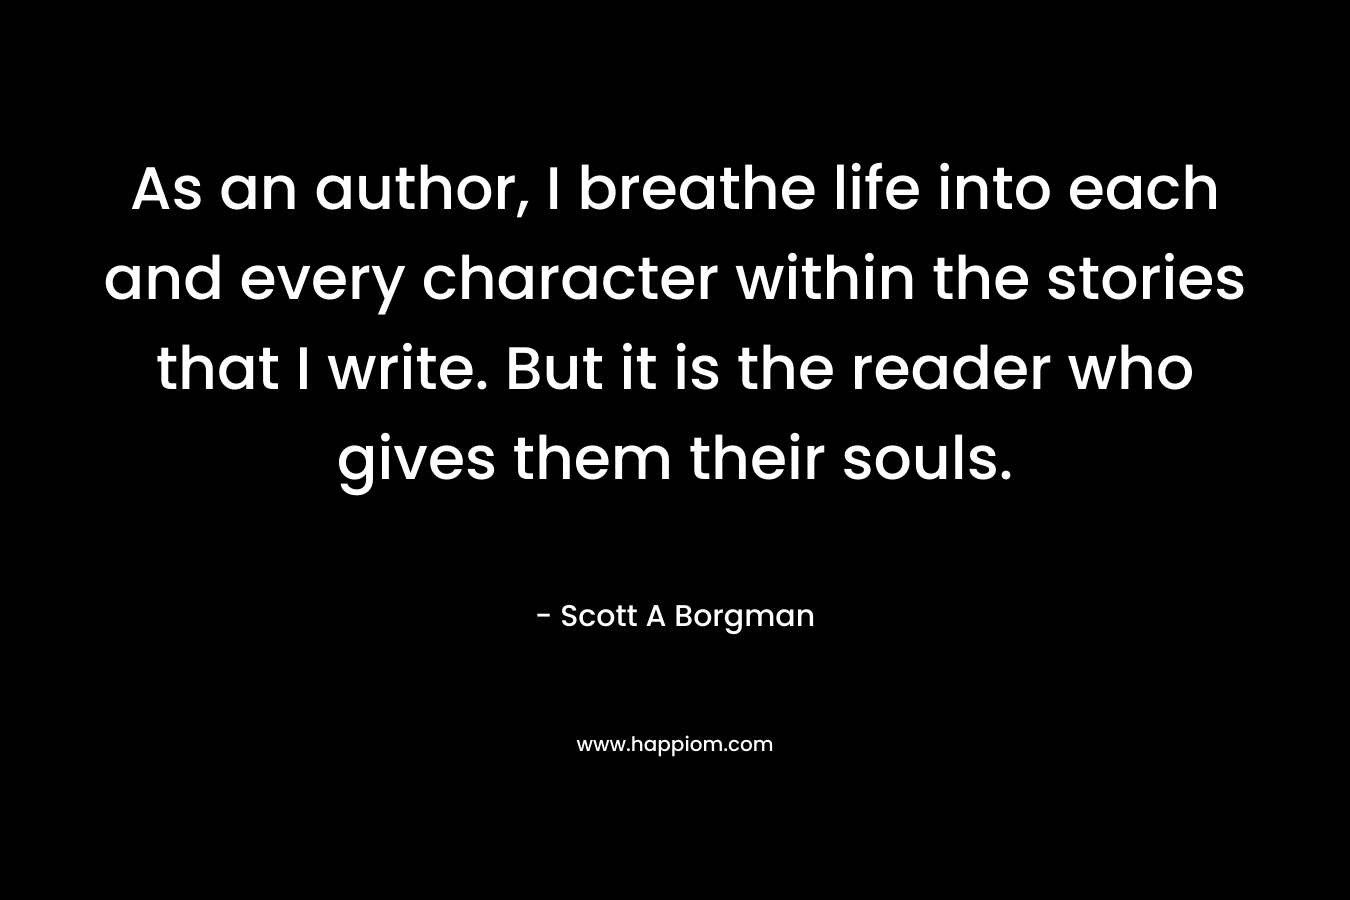 As an author, I breathe life into each and every character within the stories that I write. But it is the reader who gives them their souls.